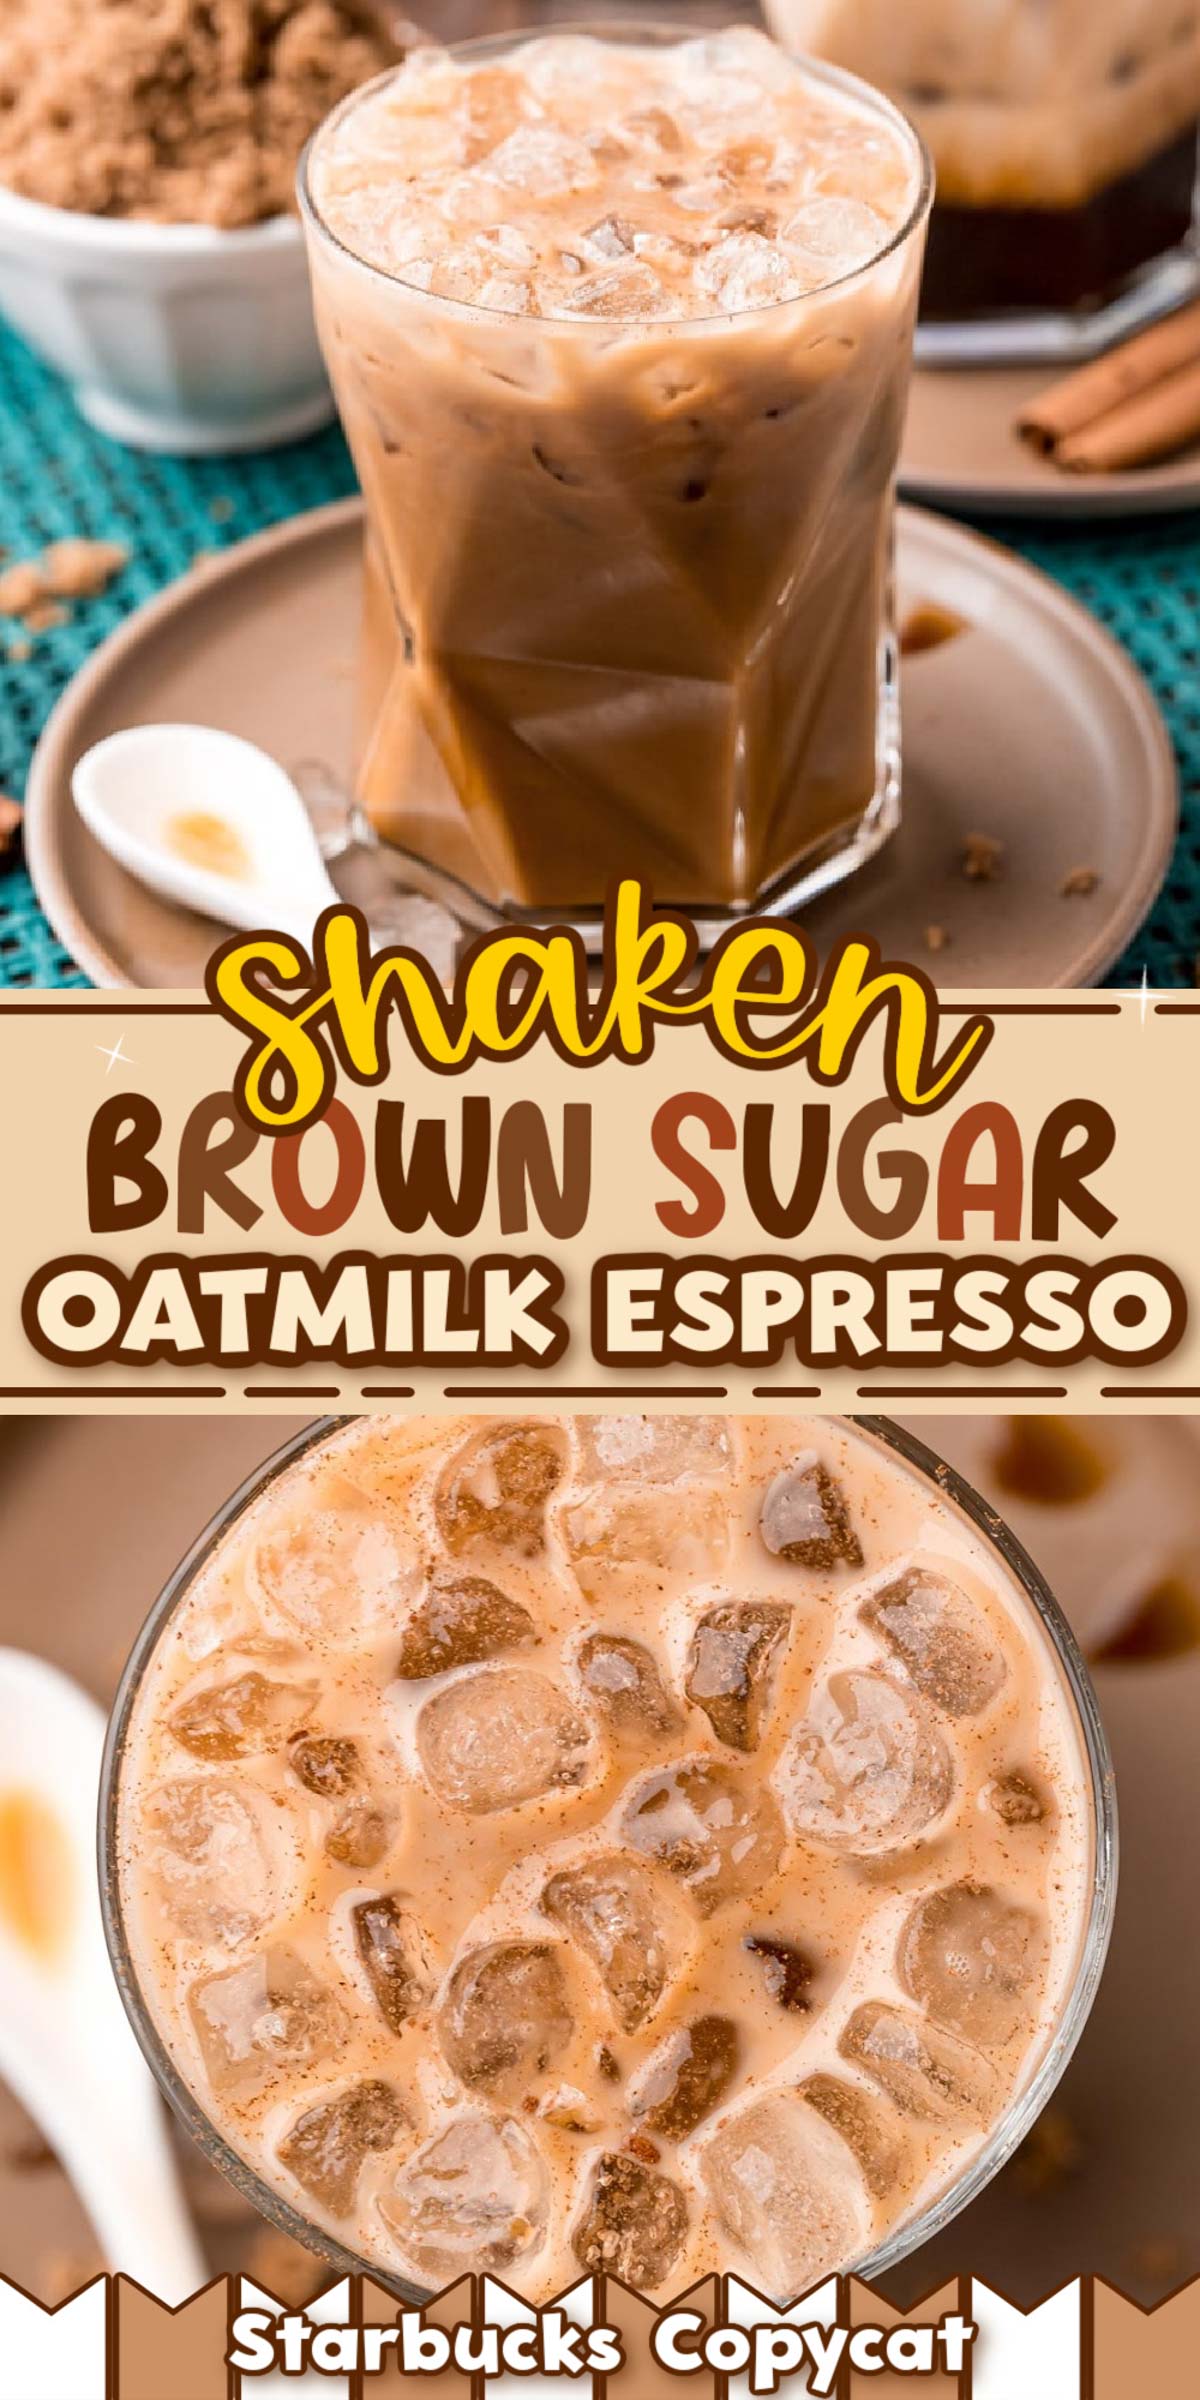 This Shaken Brown Sugar Oatmilk Espresso is a Starbucks Copycat recipe made with brown sugar simple syrup, espresso, oat milk, and cinnamon. It's easy, delicious, and in my opinion, even better than the original! via @sugarandsoulco